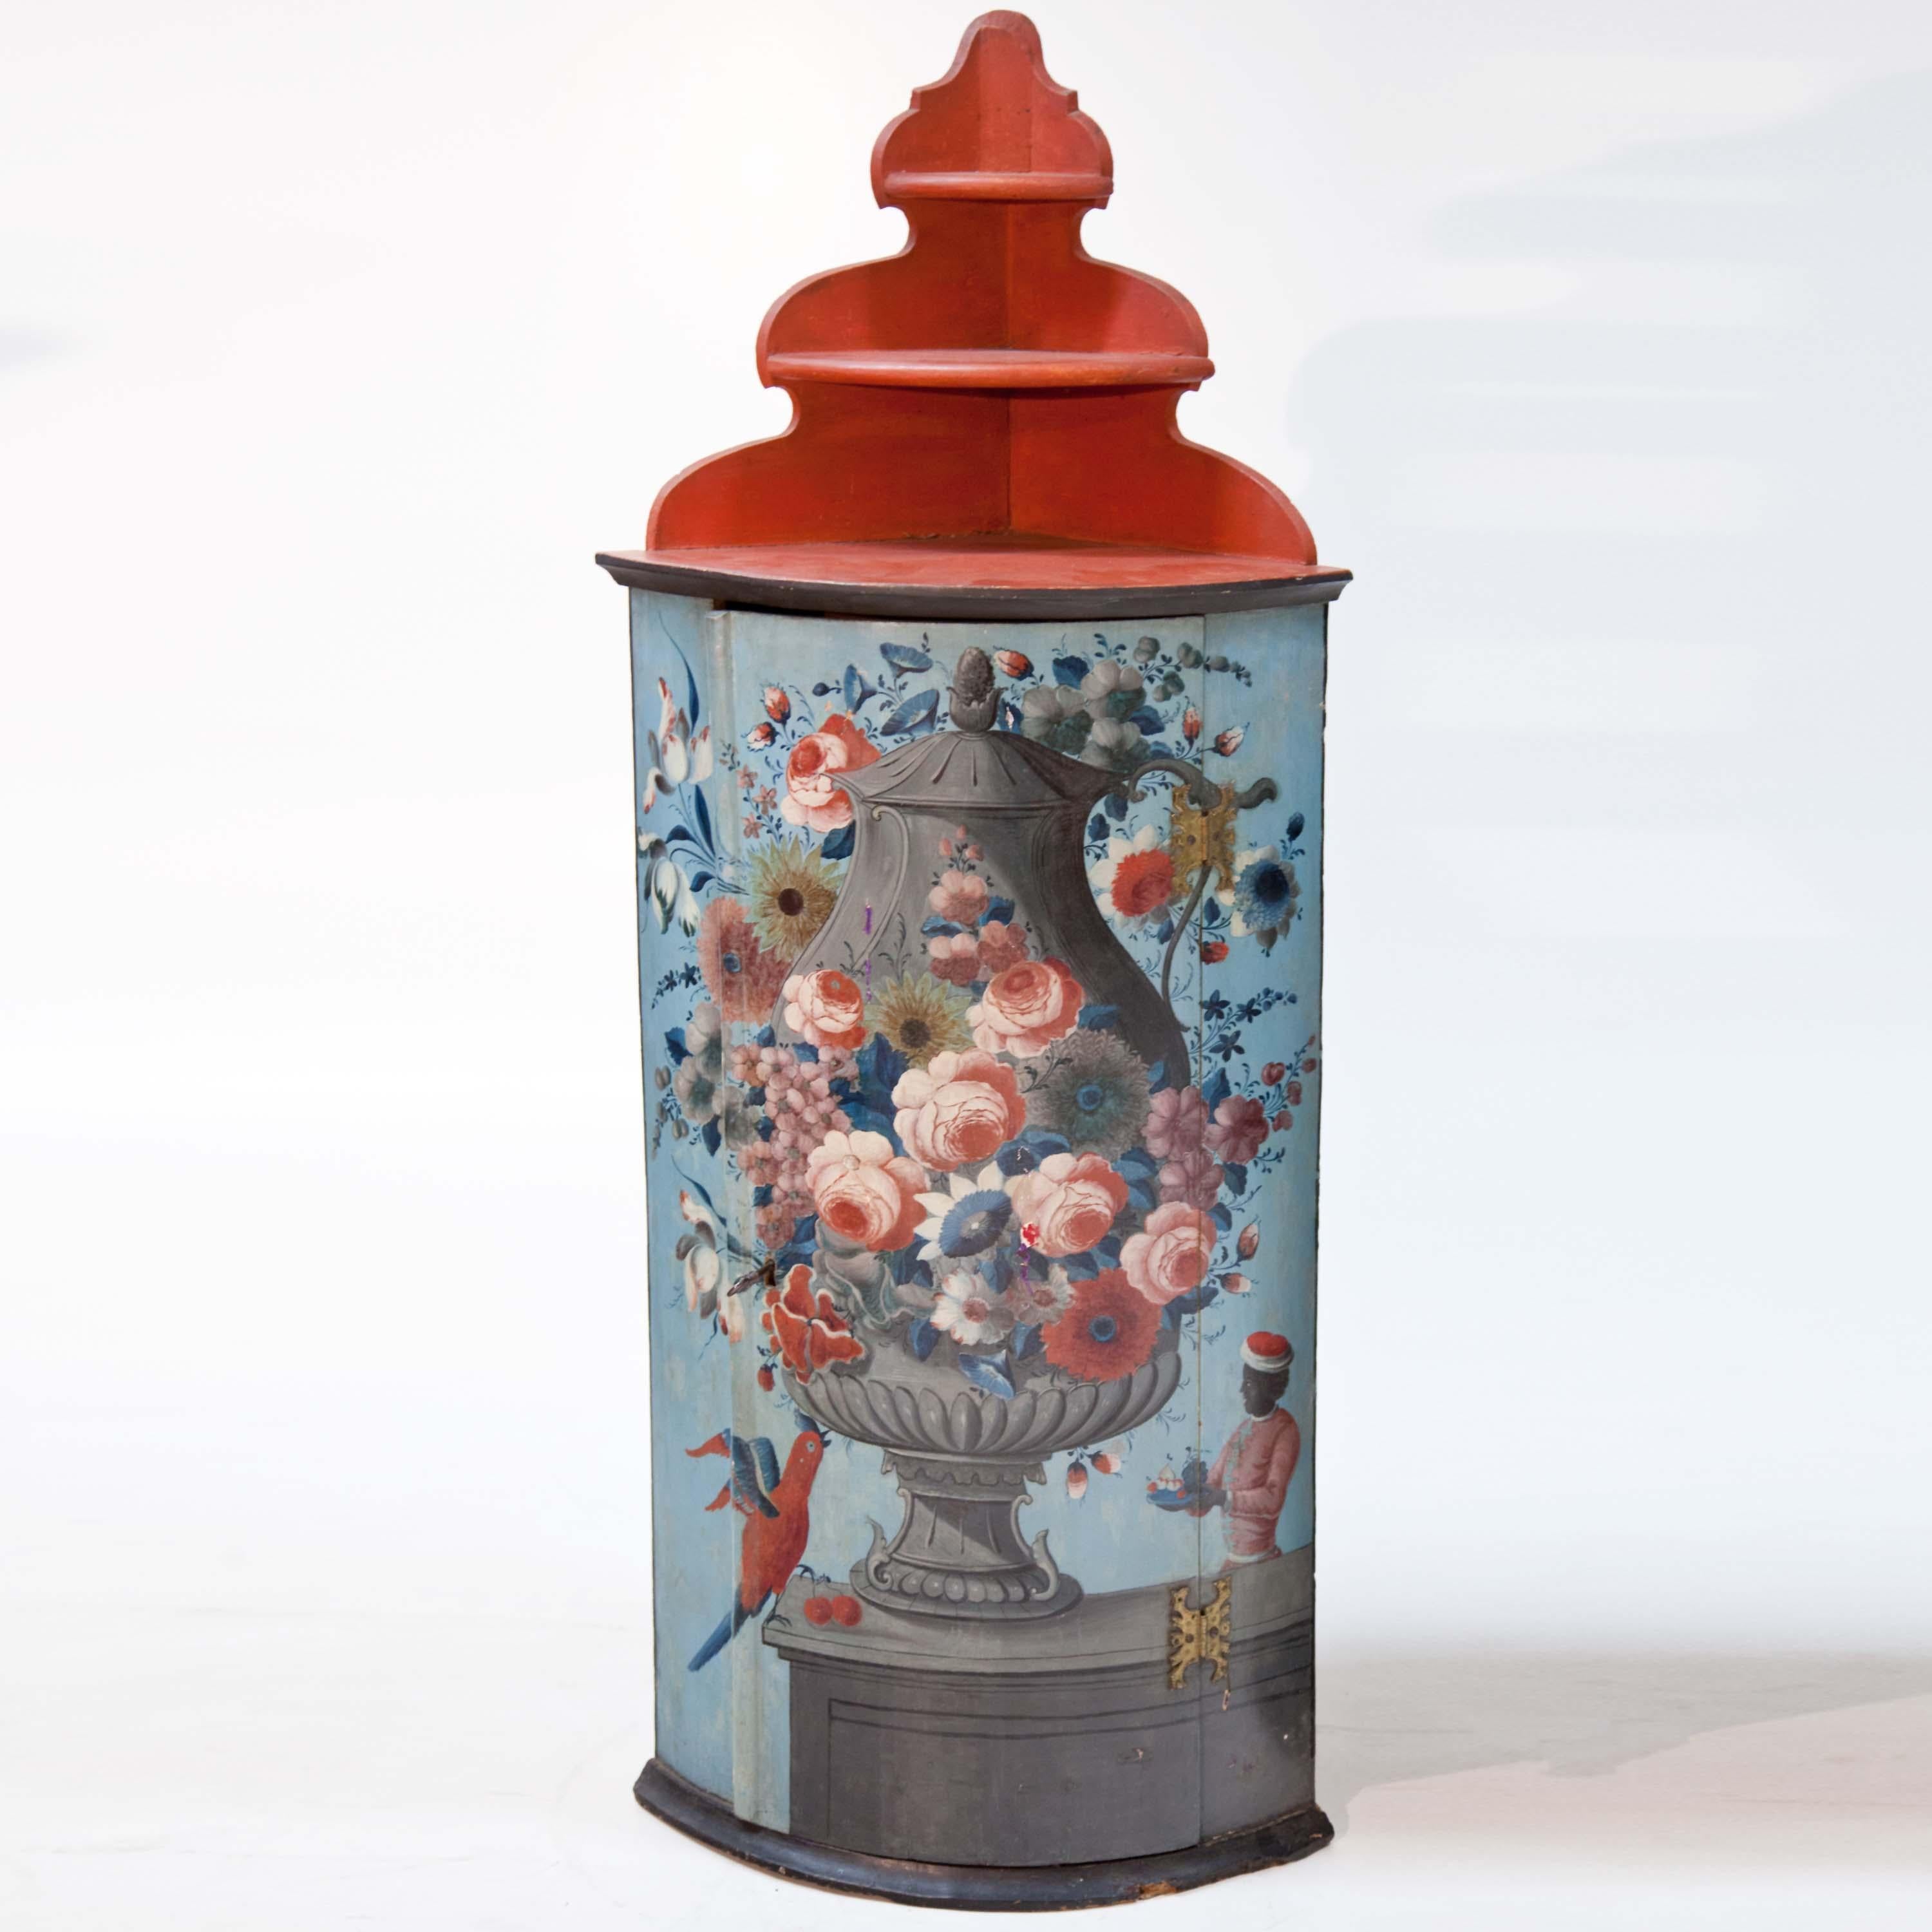 Small corner cupboard in Italian style with polychrome amphora with flowers on the front. The segment-shaped body (side length 33.5 cm) is complemented by a red three-tier shelf with a cut-out back wall.